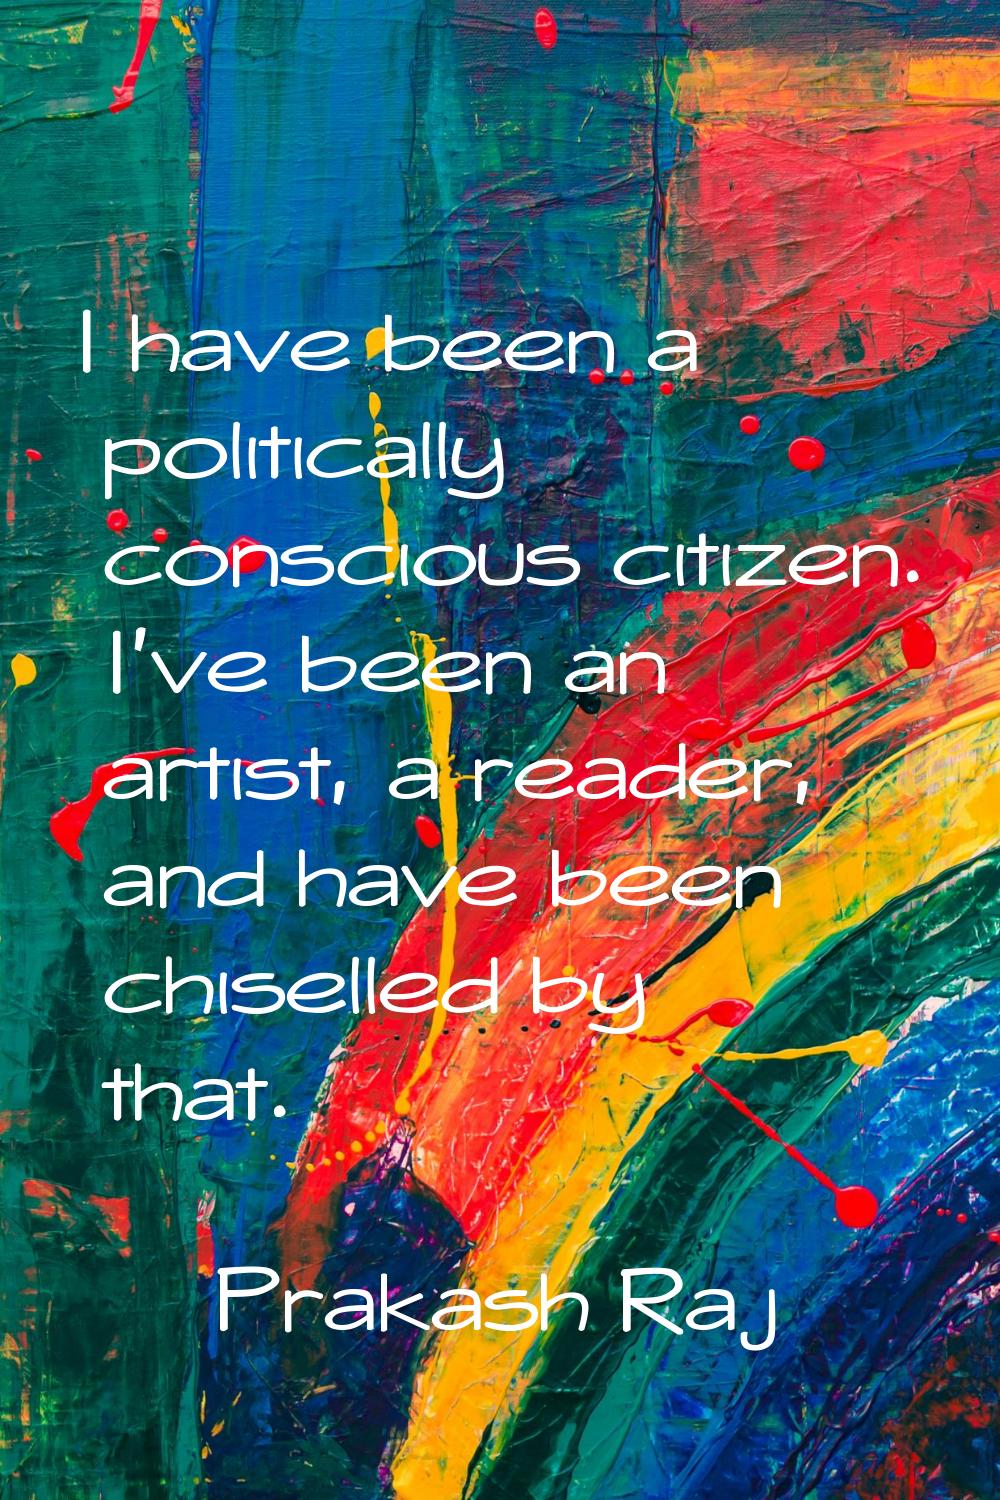 I have been a politically conscious citizen. I've been an artist, a reader, and have been chiselled